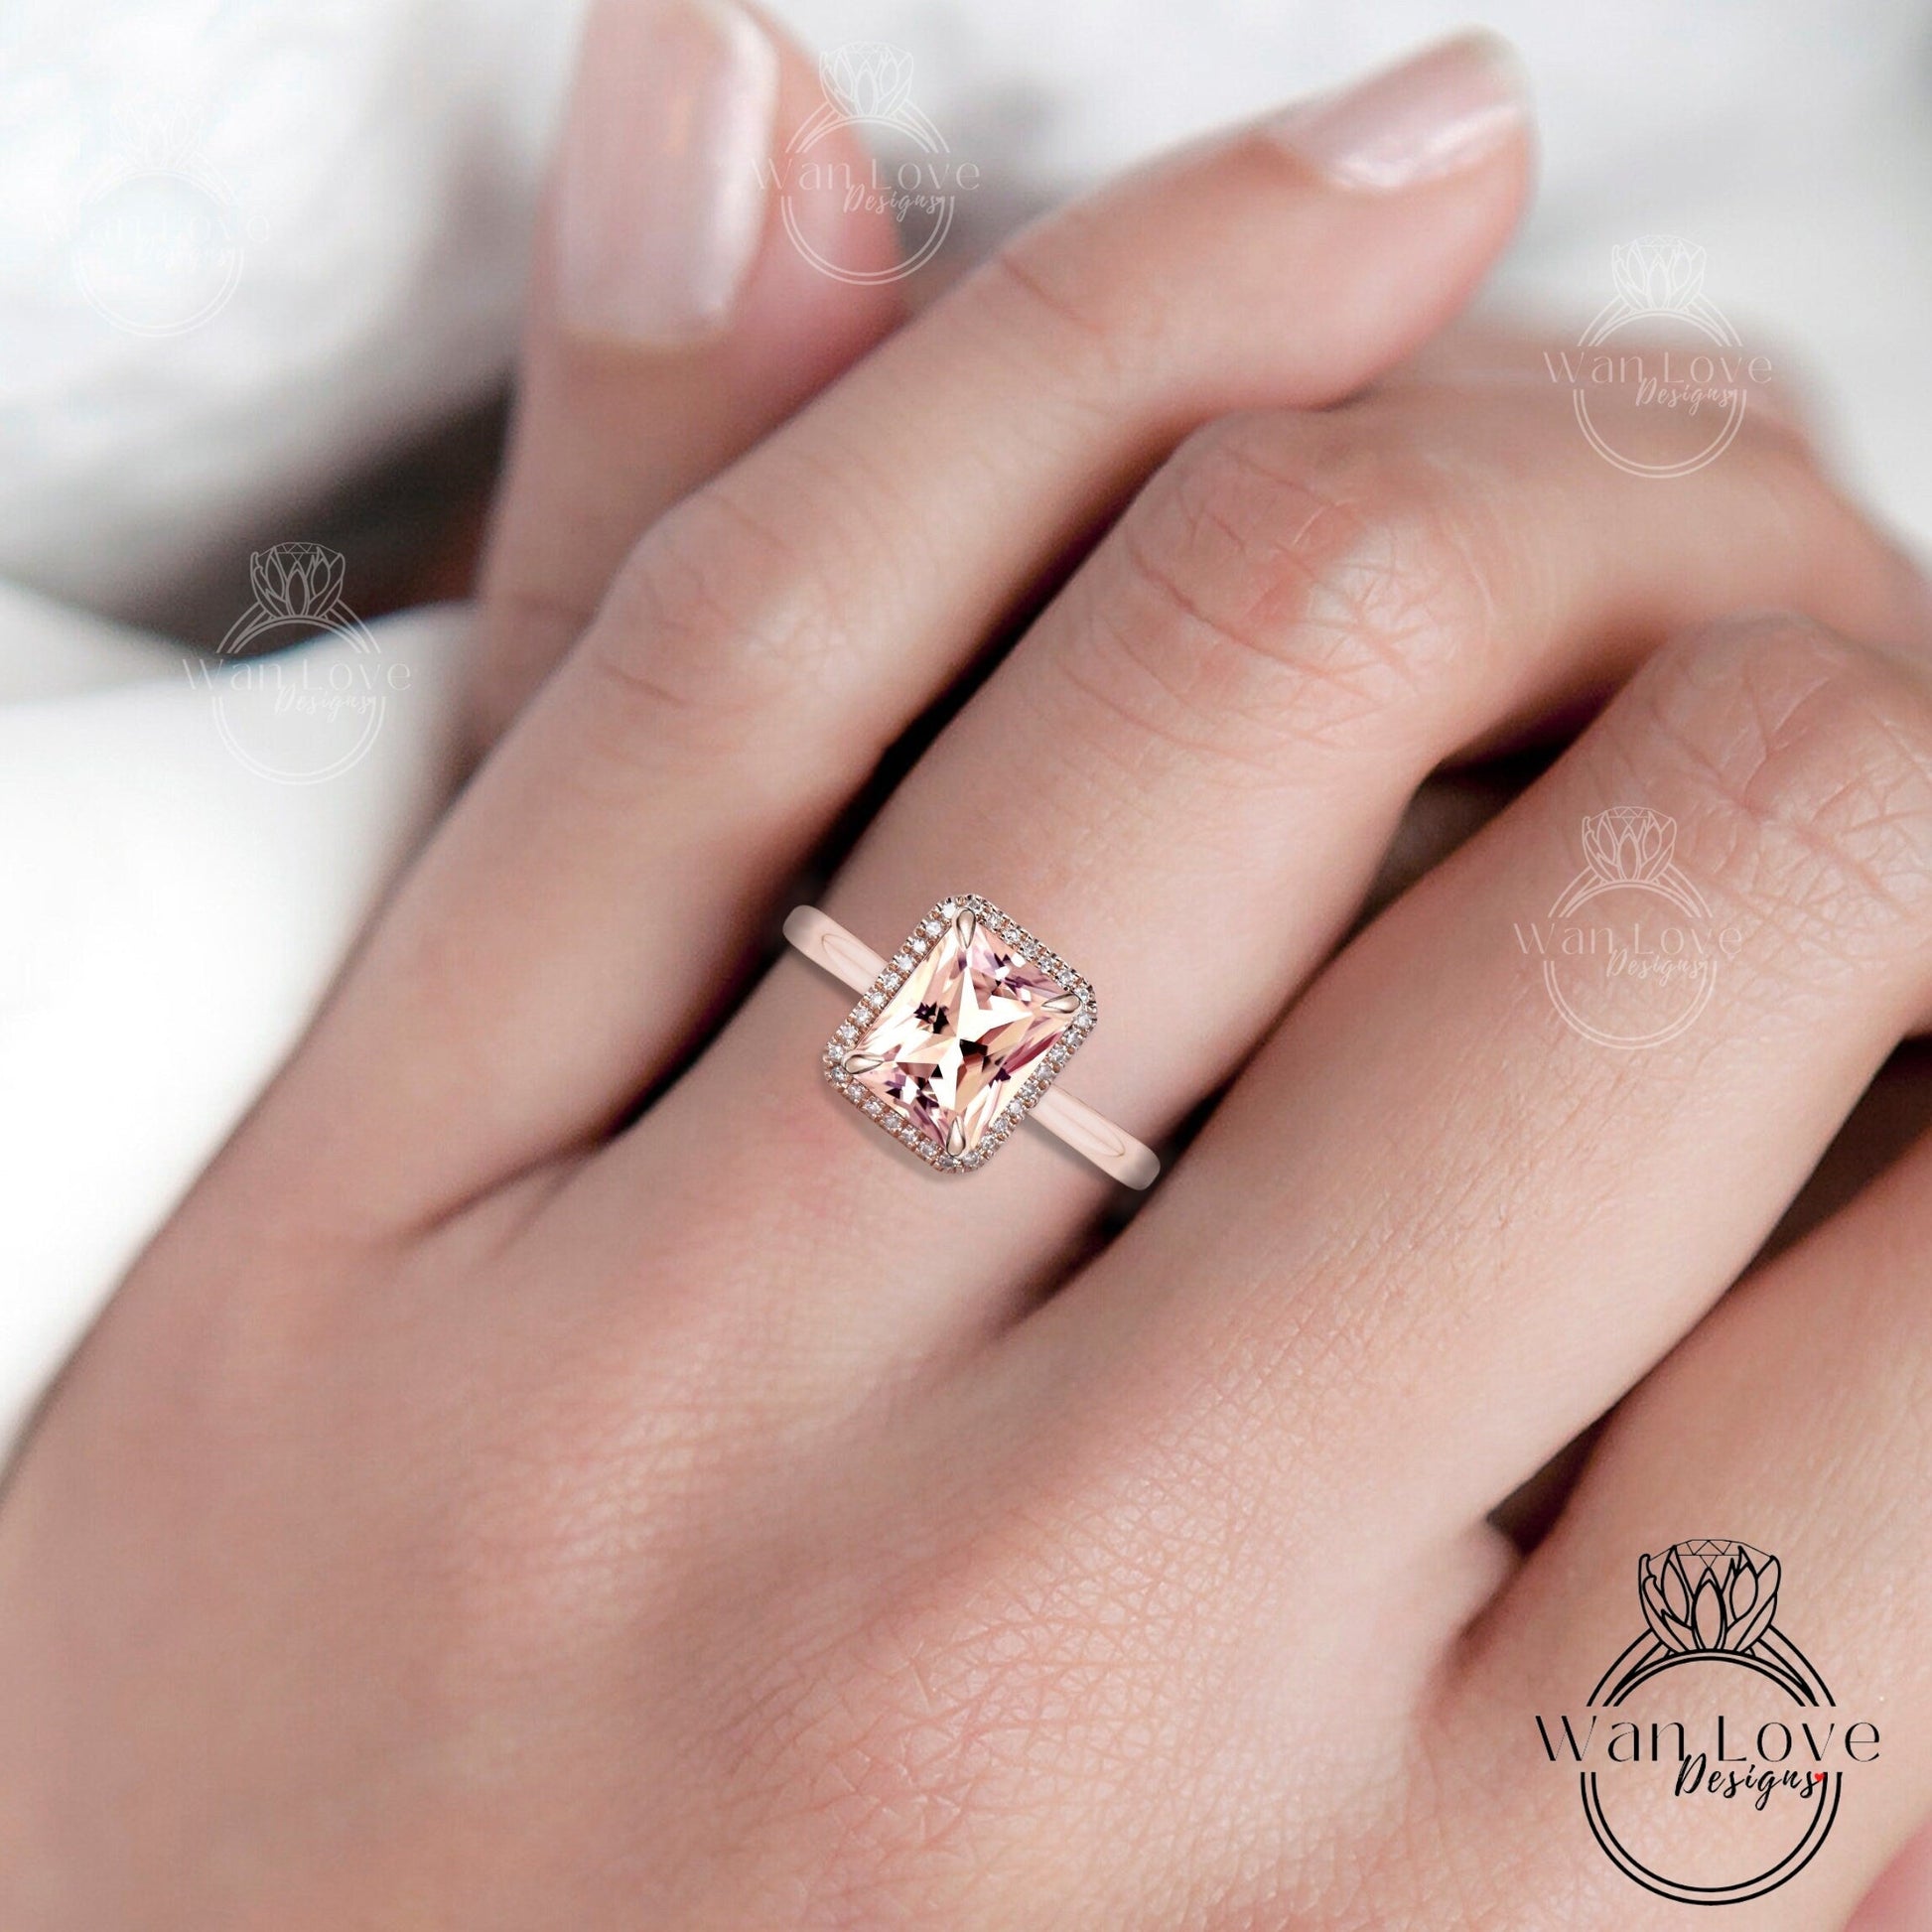 Emerald cut Peach Sapphire engagement ring rose gold halo ring diamond halo tapered plain thin dainty band art deco anniversary promise ring Wan Love Designs